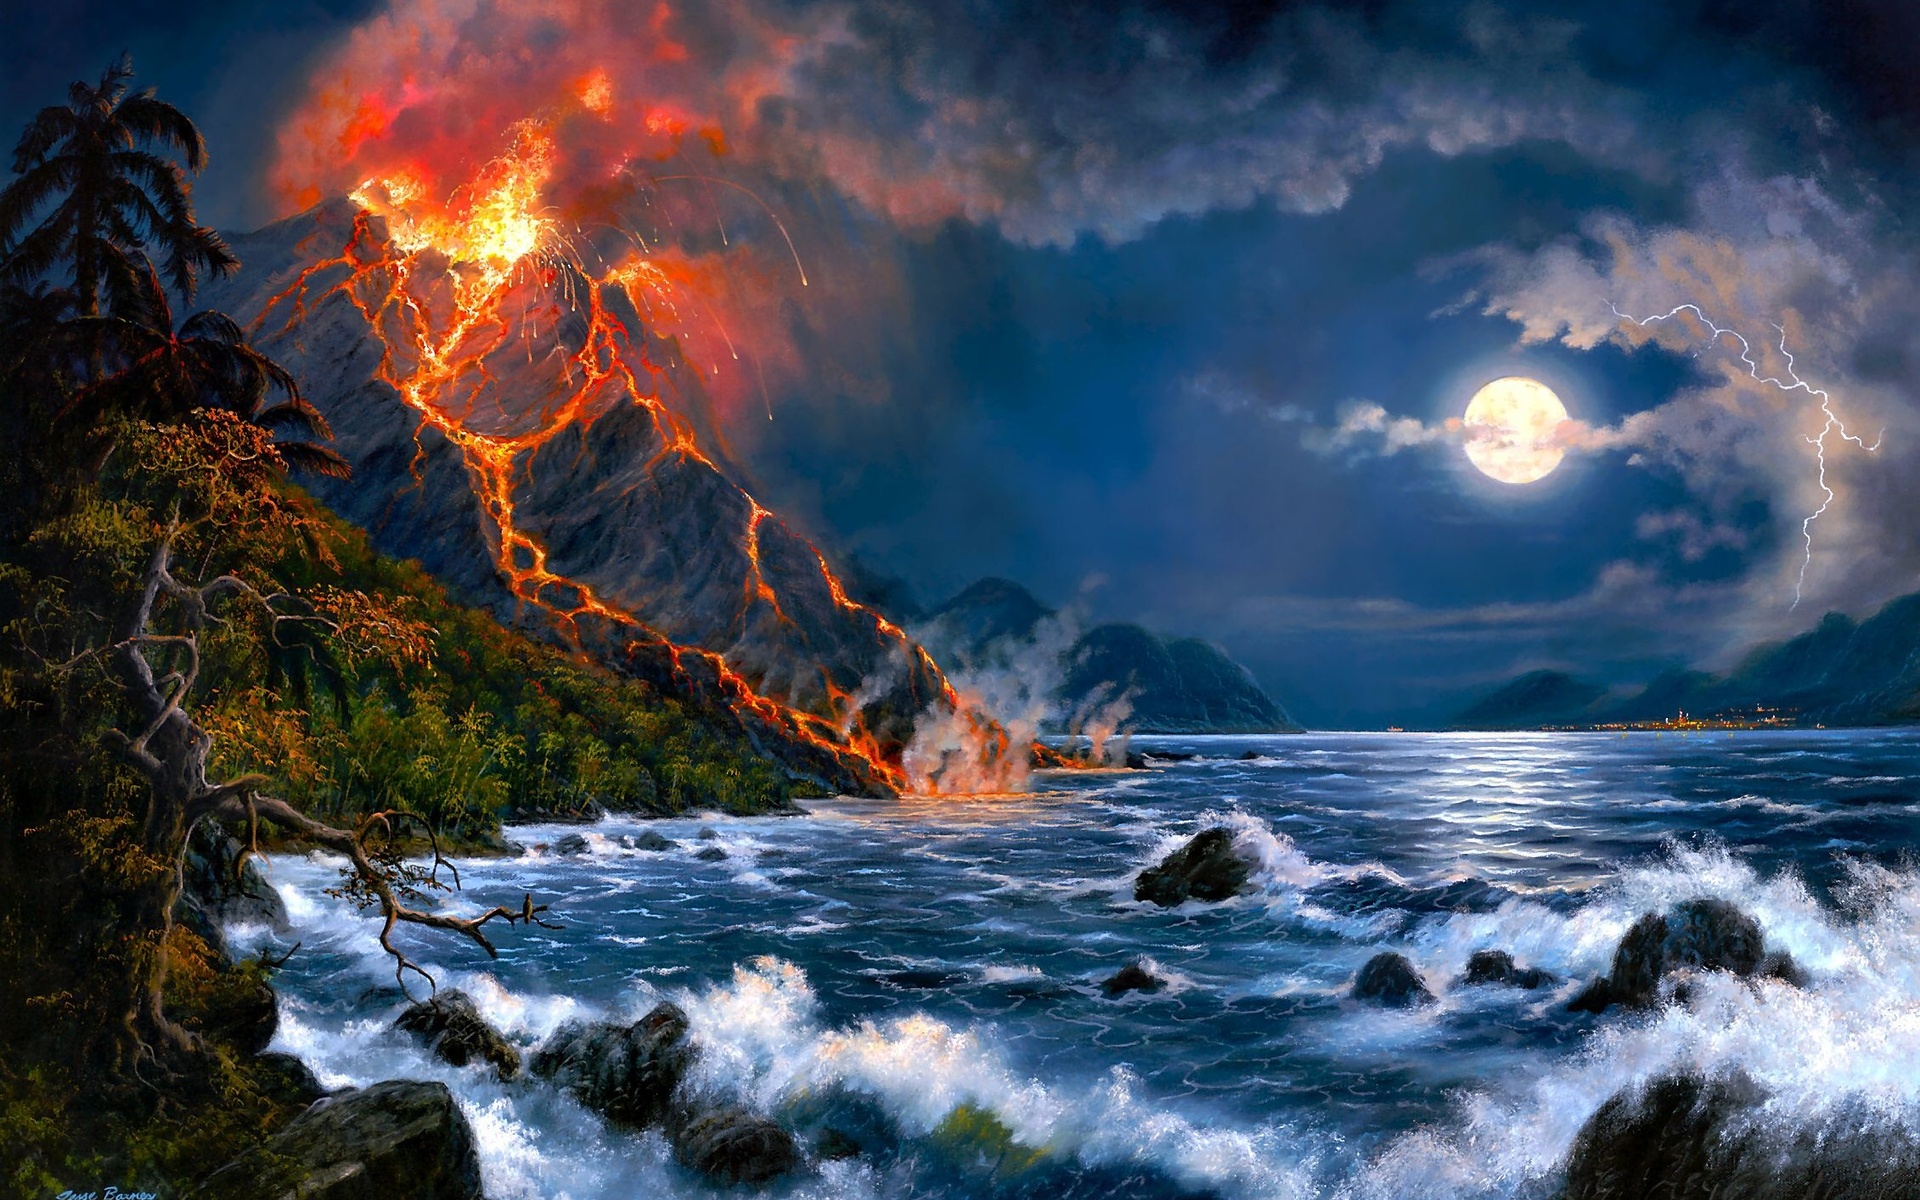 landscapes, Volcano, Fire, Flames, Lava, Jungle, Trees, Forest, Seascape, Ocean, Sea, Waves, Night, Moon, Moonlight, Skies, Clouds, Artistic, Paintings, Airbrushing, Cg, Digital art, Fantasy Wallpaper